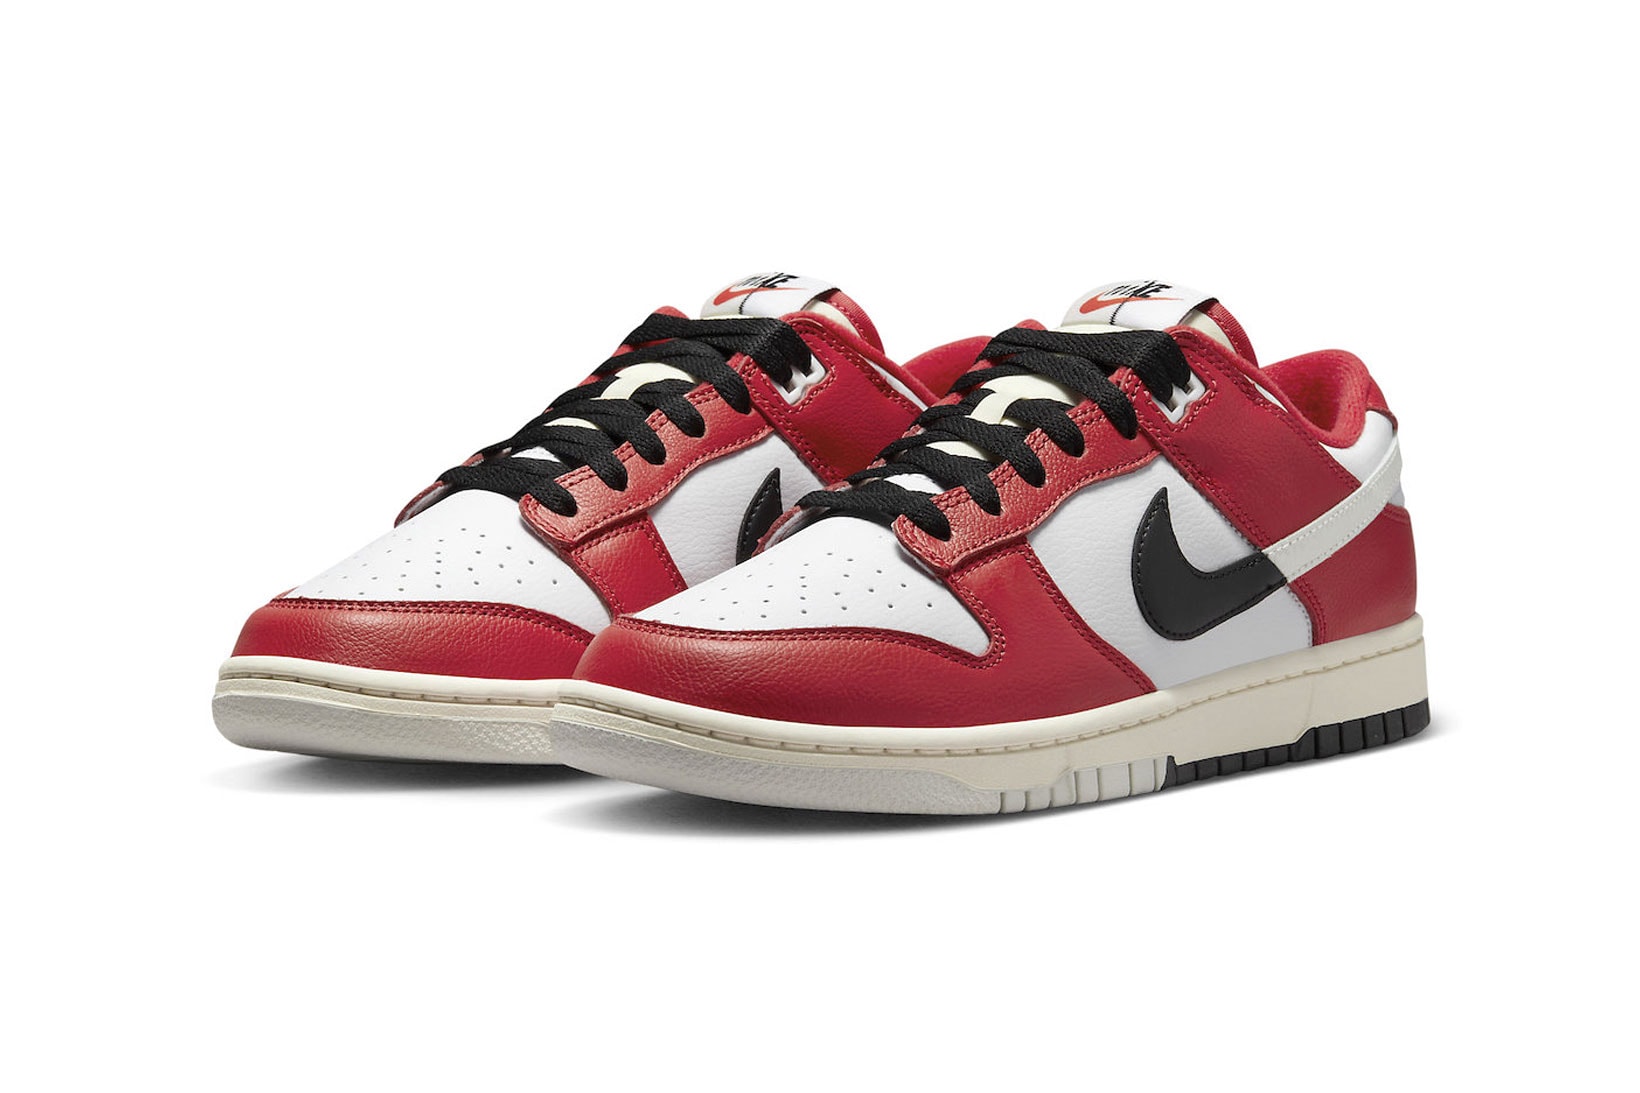 Nike Dunk Low Chicago Split Red Black White Official Images Release Date Info